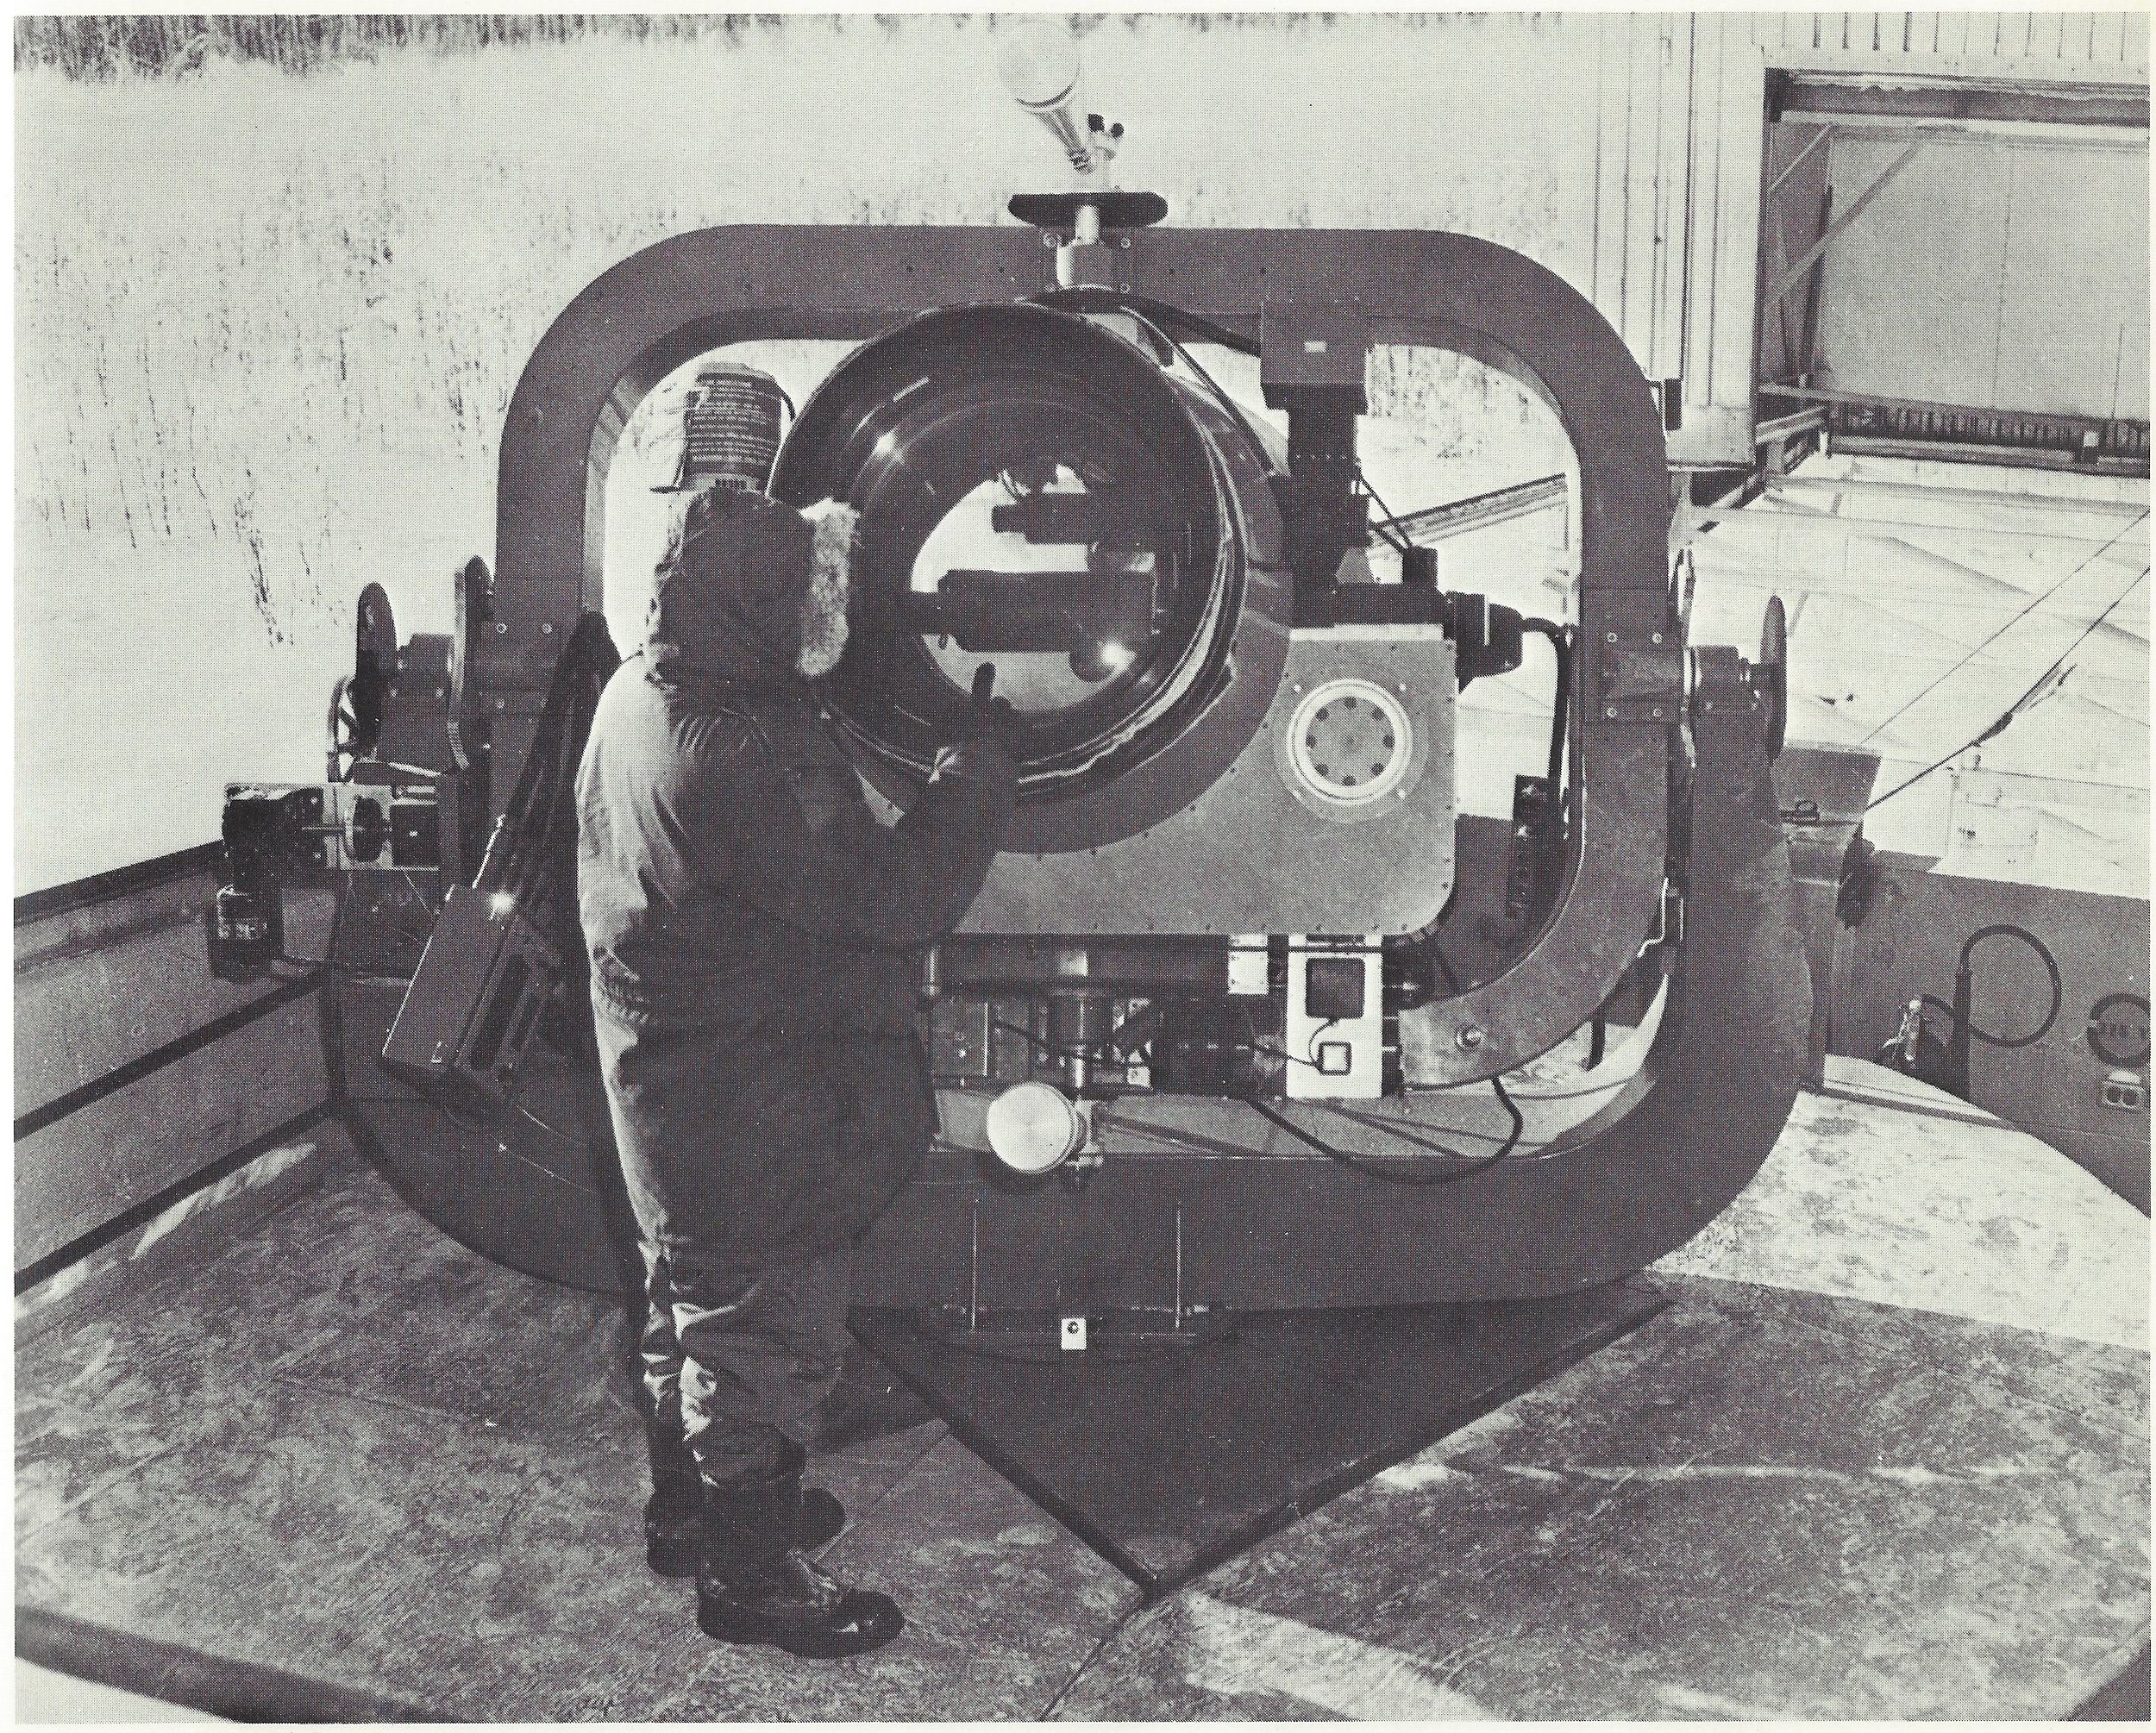  Caption: "SPACE BROWNIE - The most sensitive and precise satellite-tracking instrument in NORAD's satellite detection and tracking network is the Baker-Nunn camera, shown here. It can photograph light reflected from an object the size of a basketbal